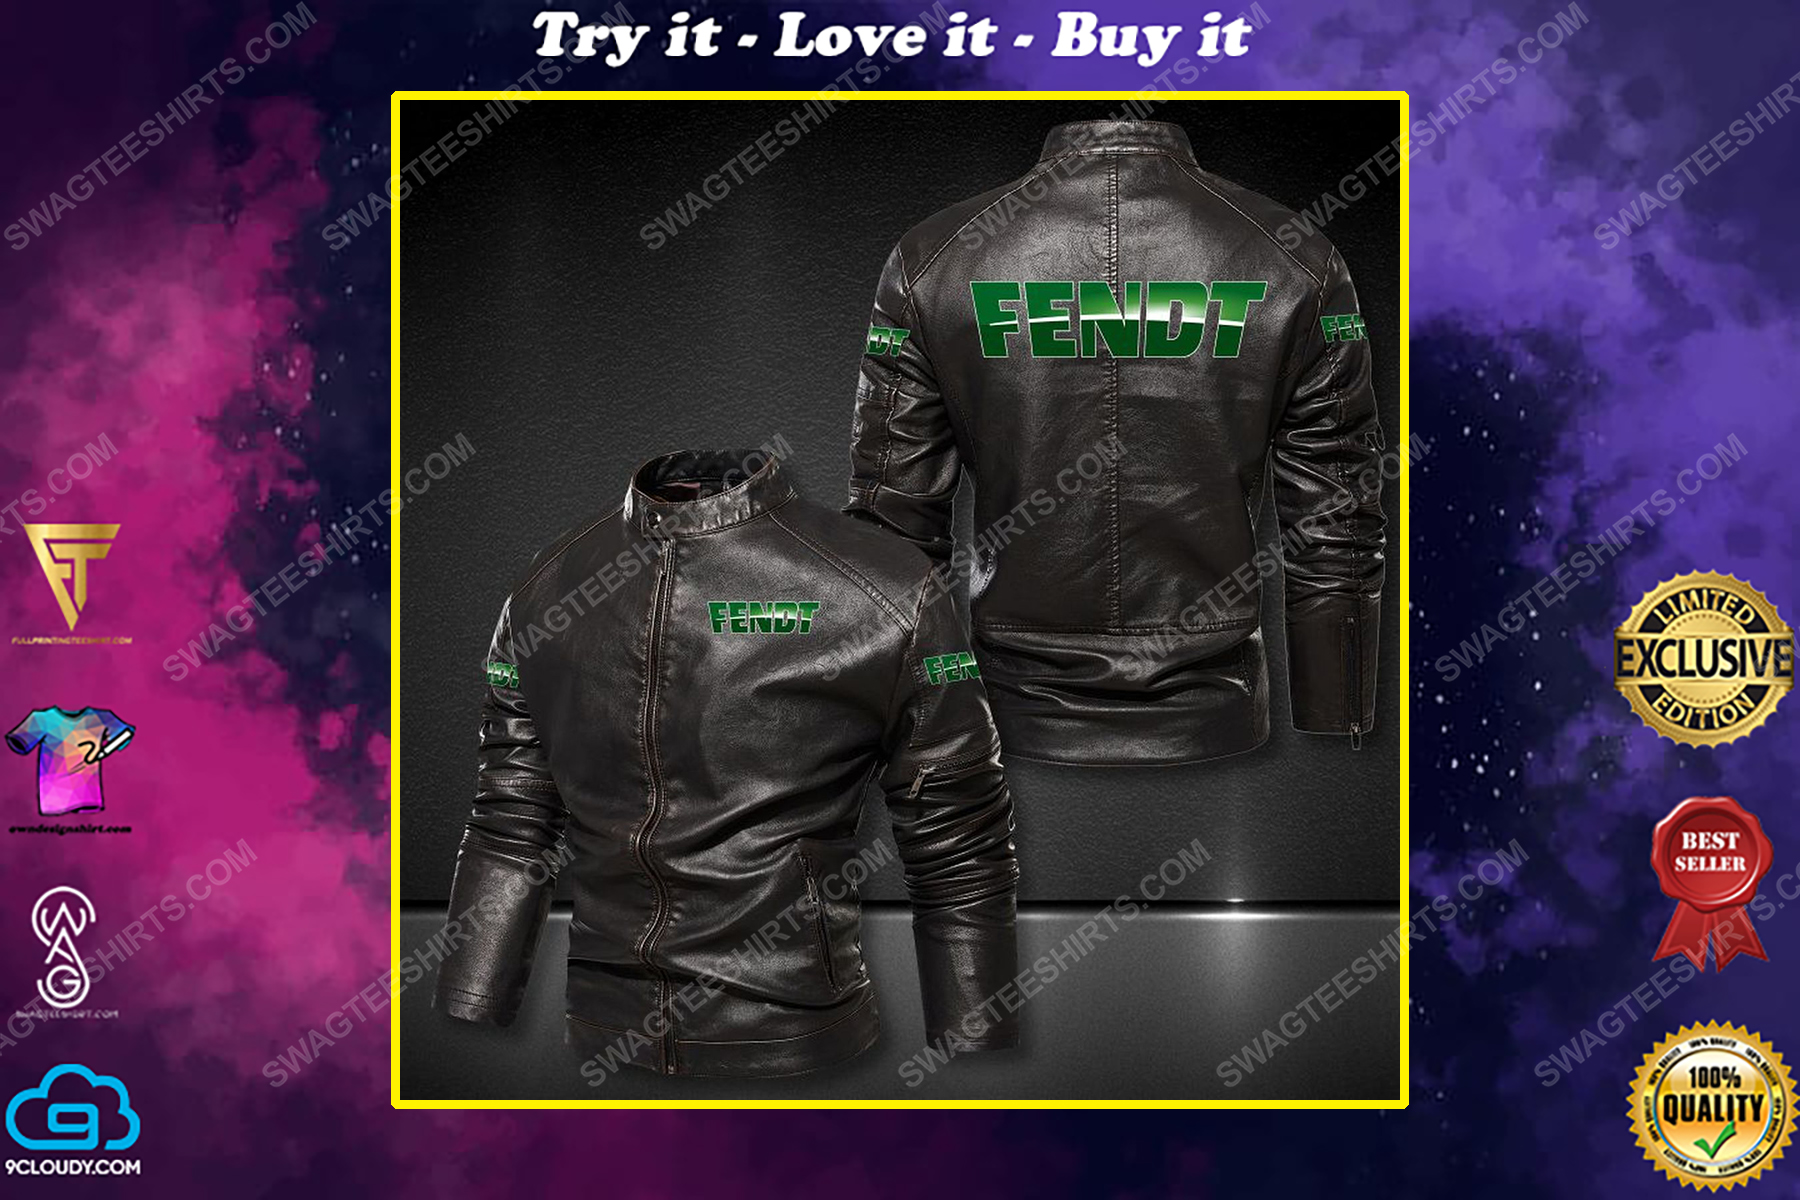 The fendt company sports leather jacket